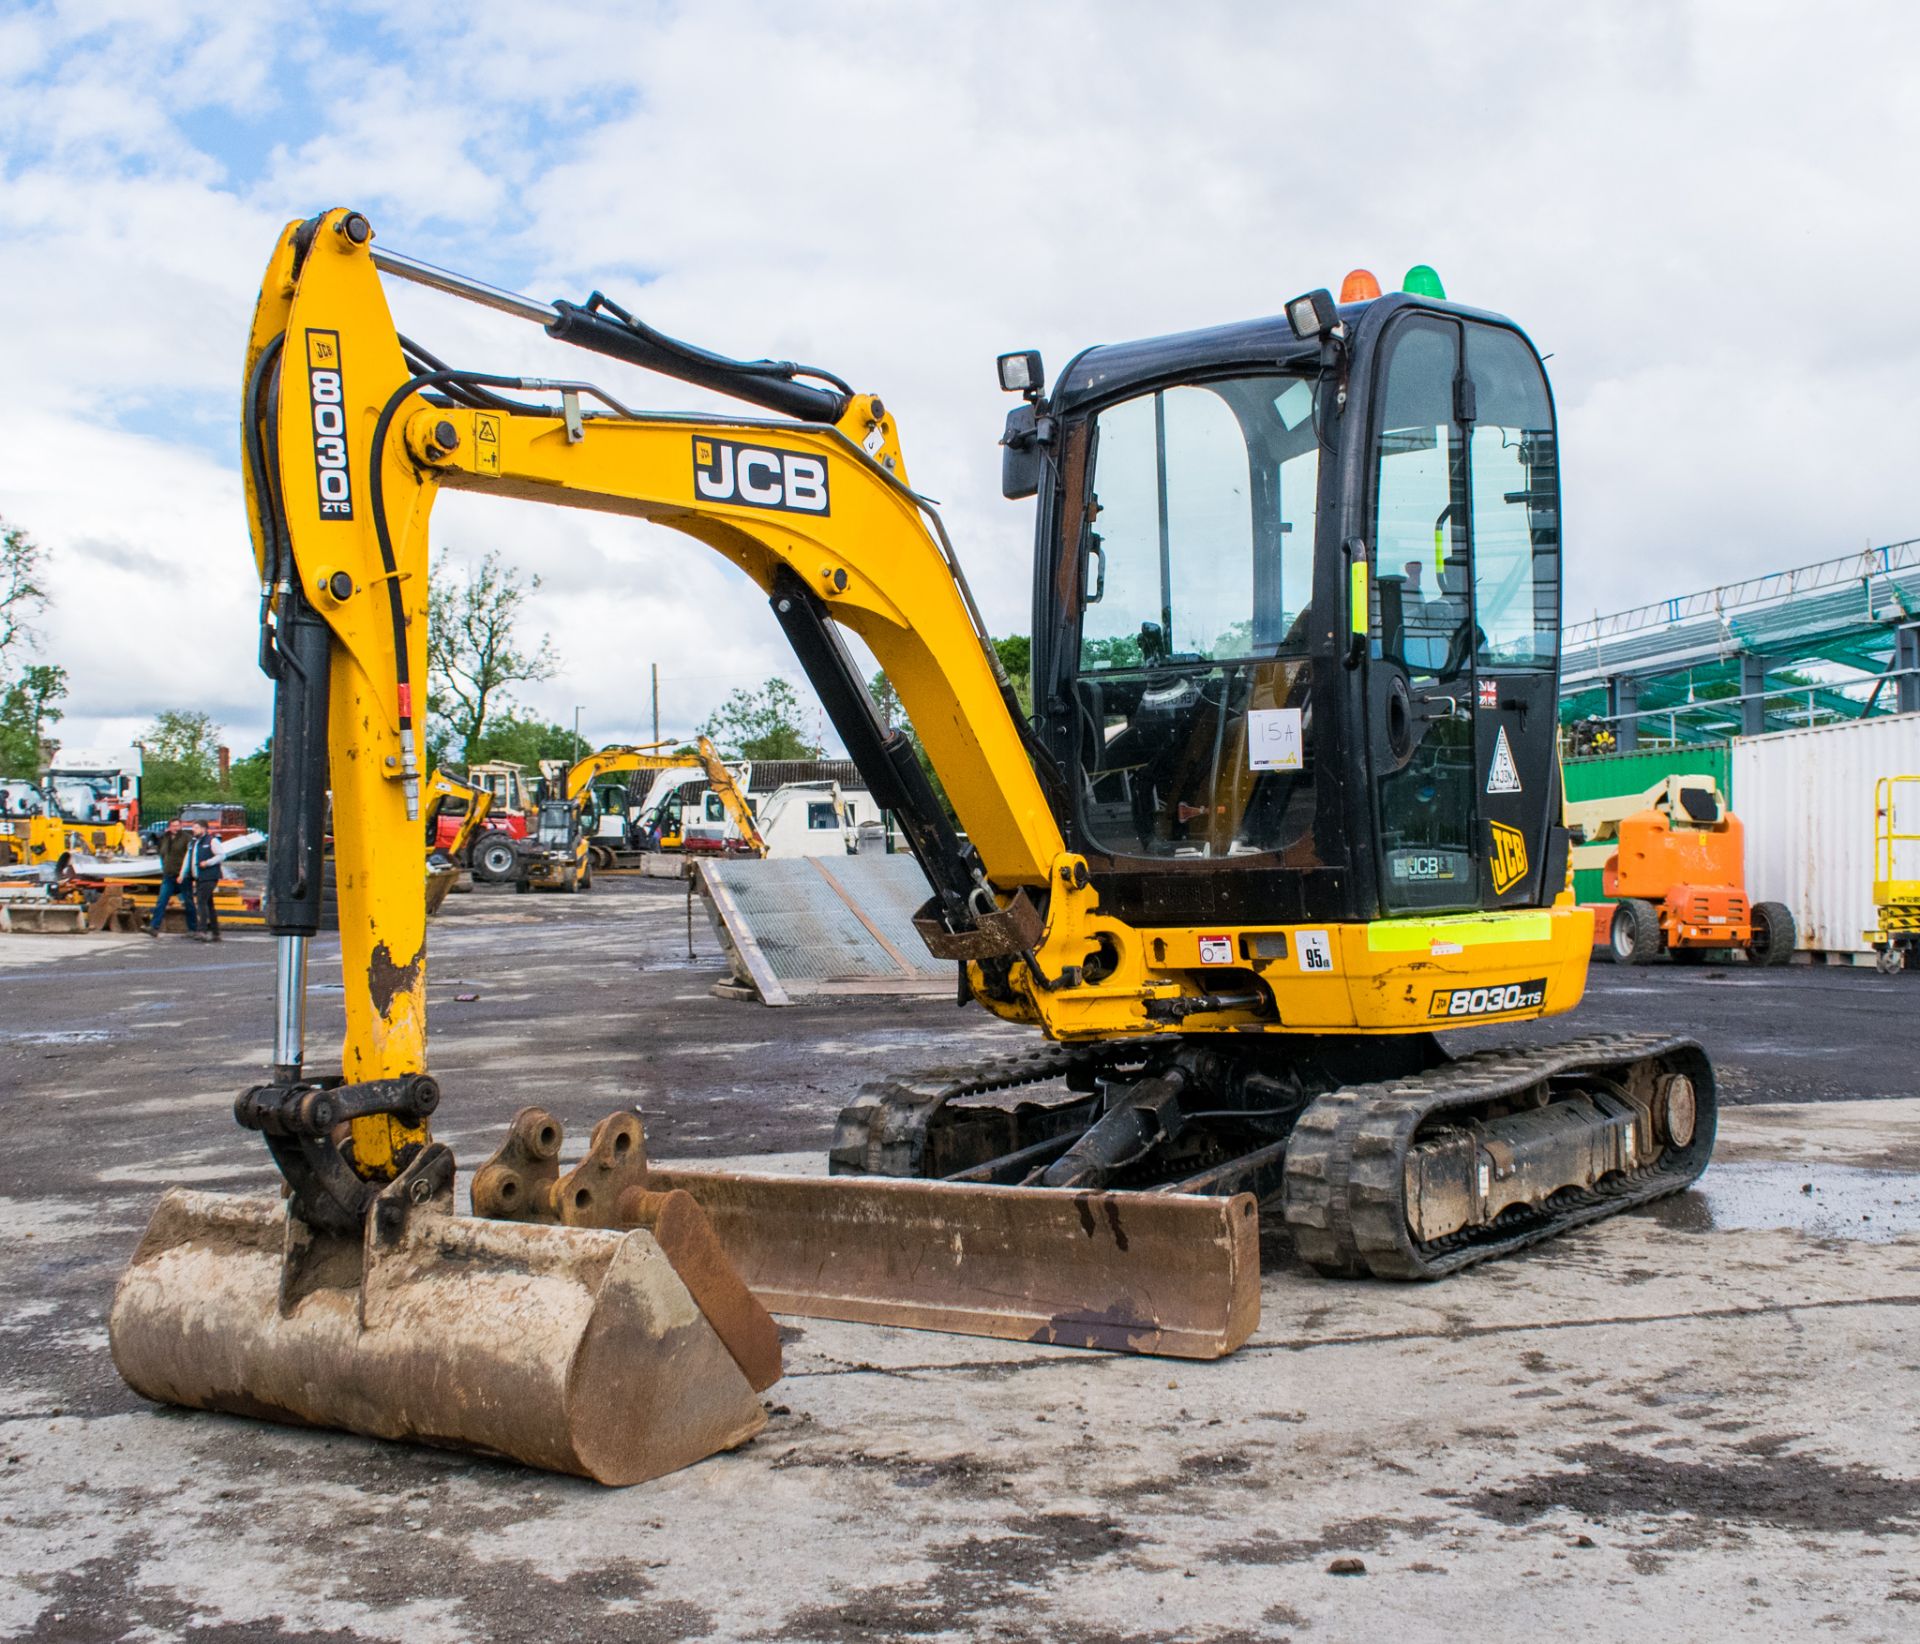 JCB 8030 3.0 tonne rubber tracked mini excavator  Year: 2014  S/N: 2116919 Recorded hours: 2431